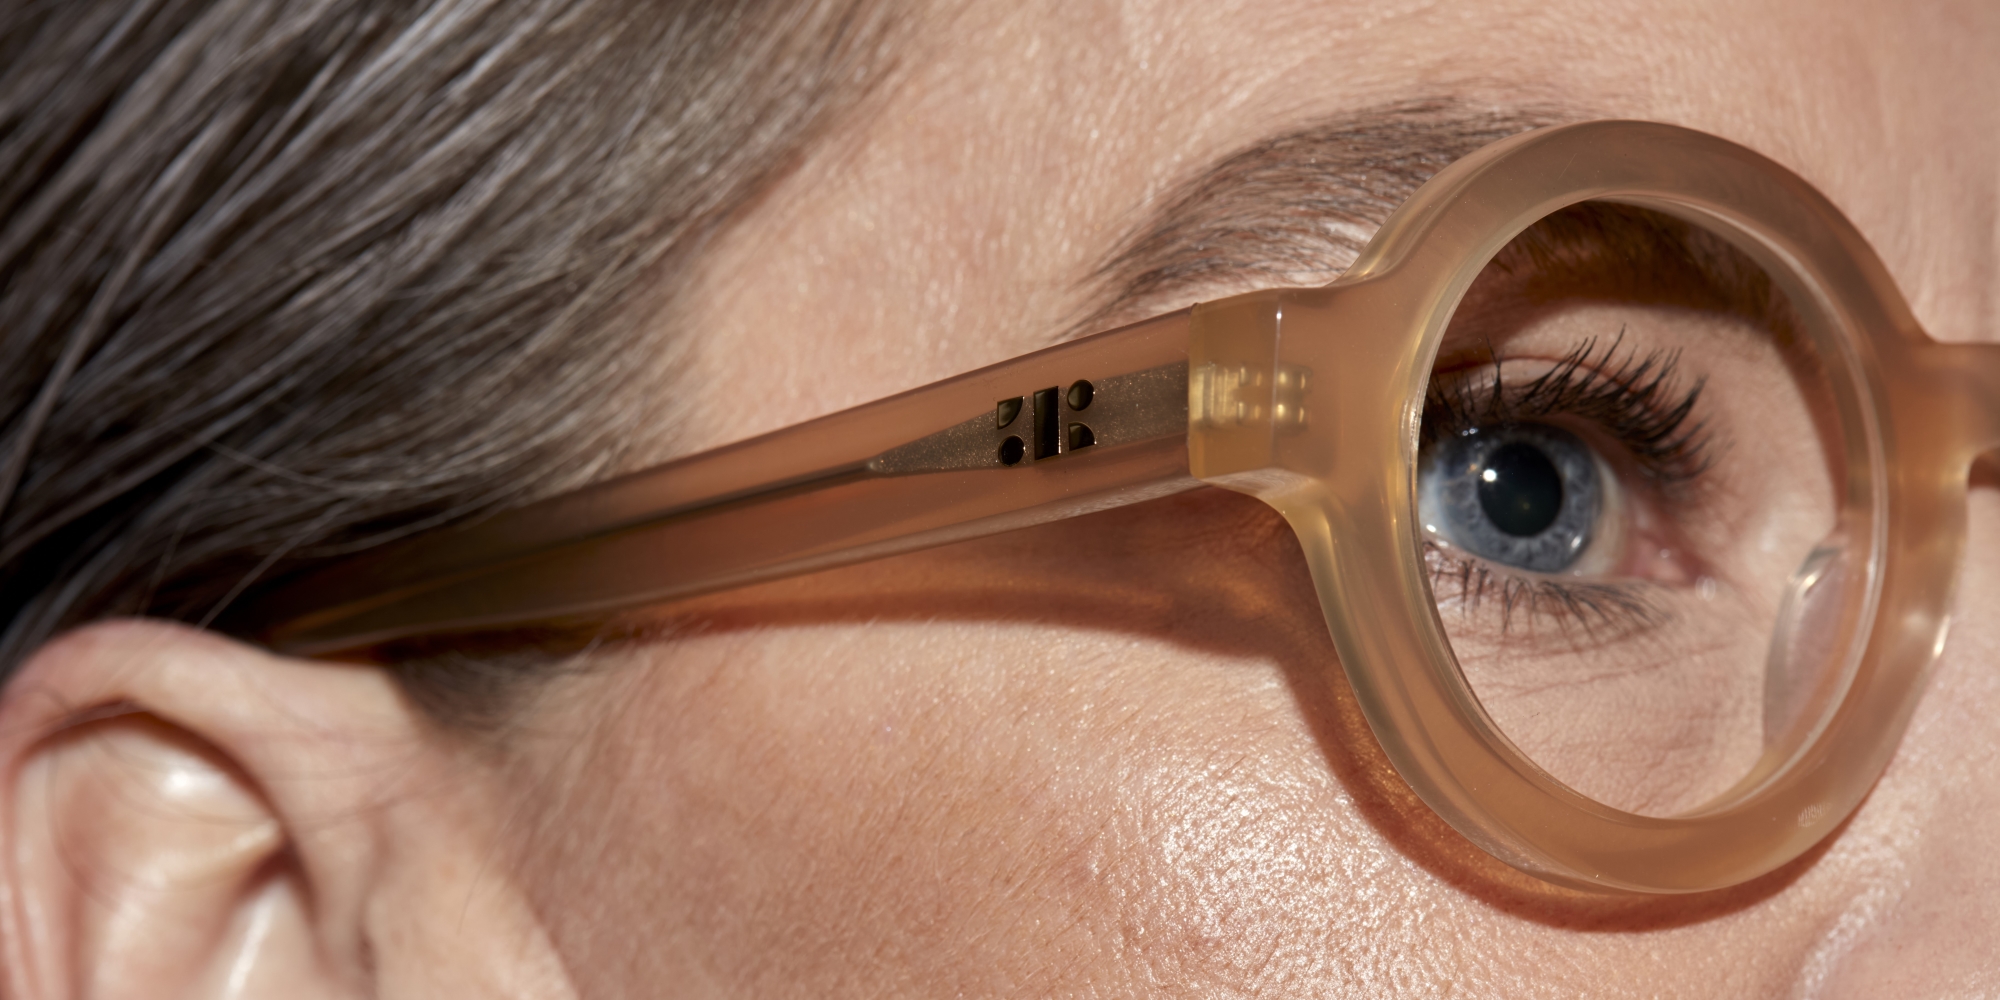 Photo Details of Lola Apricot Reading Glasses in a room